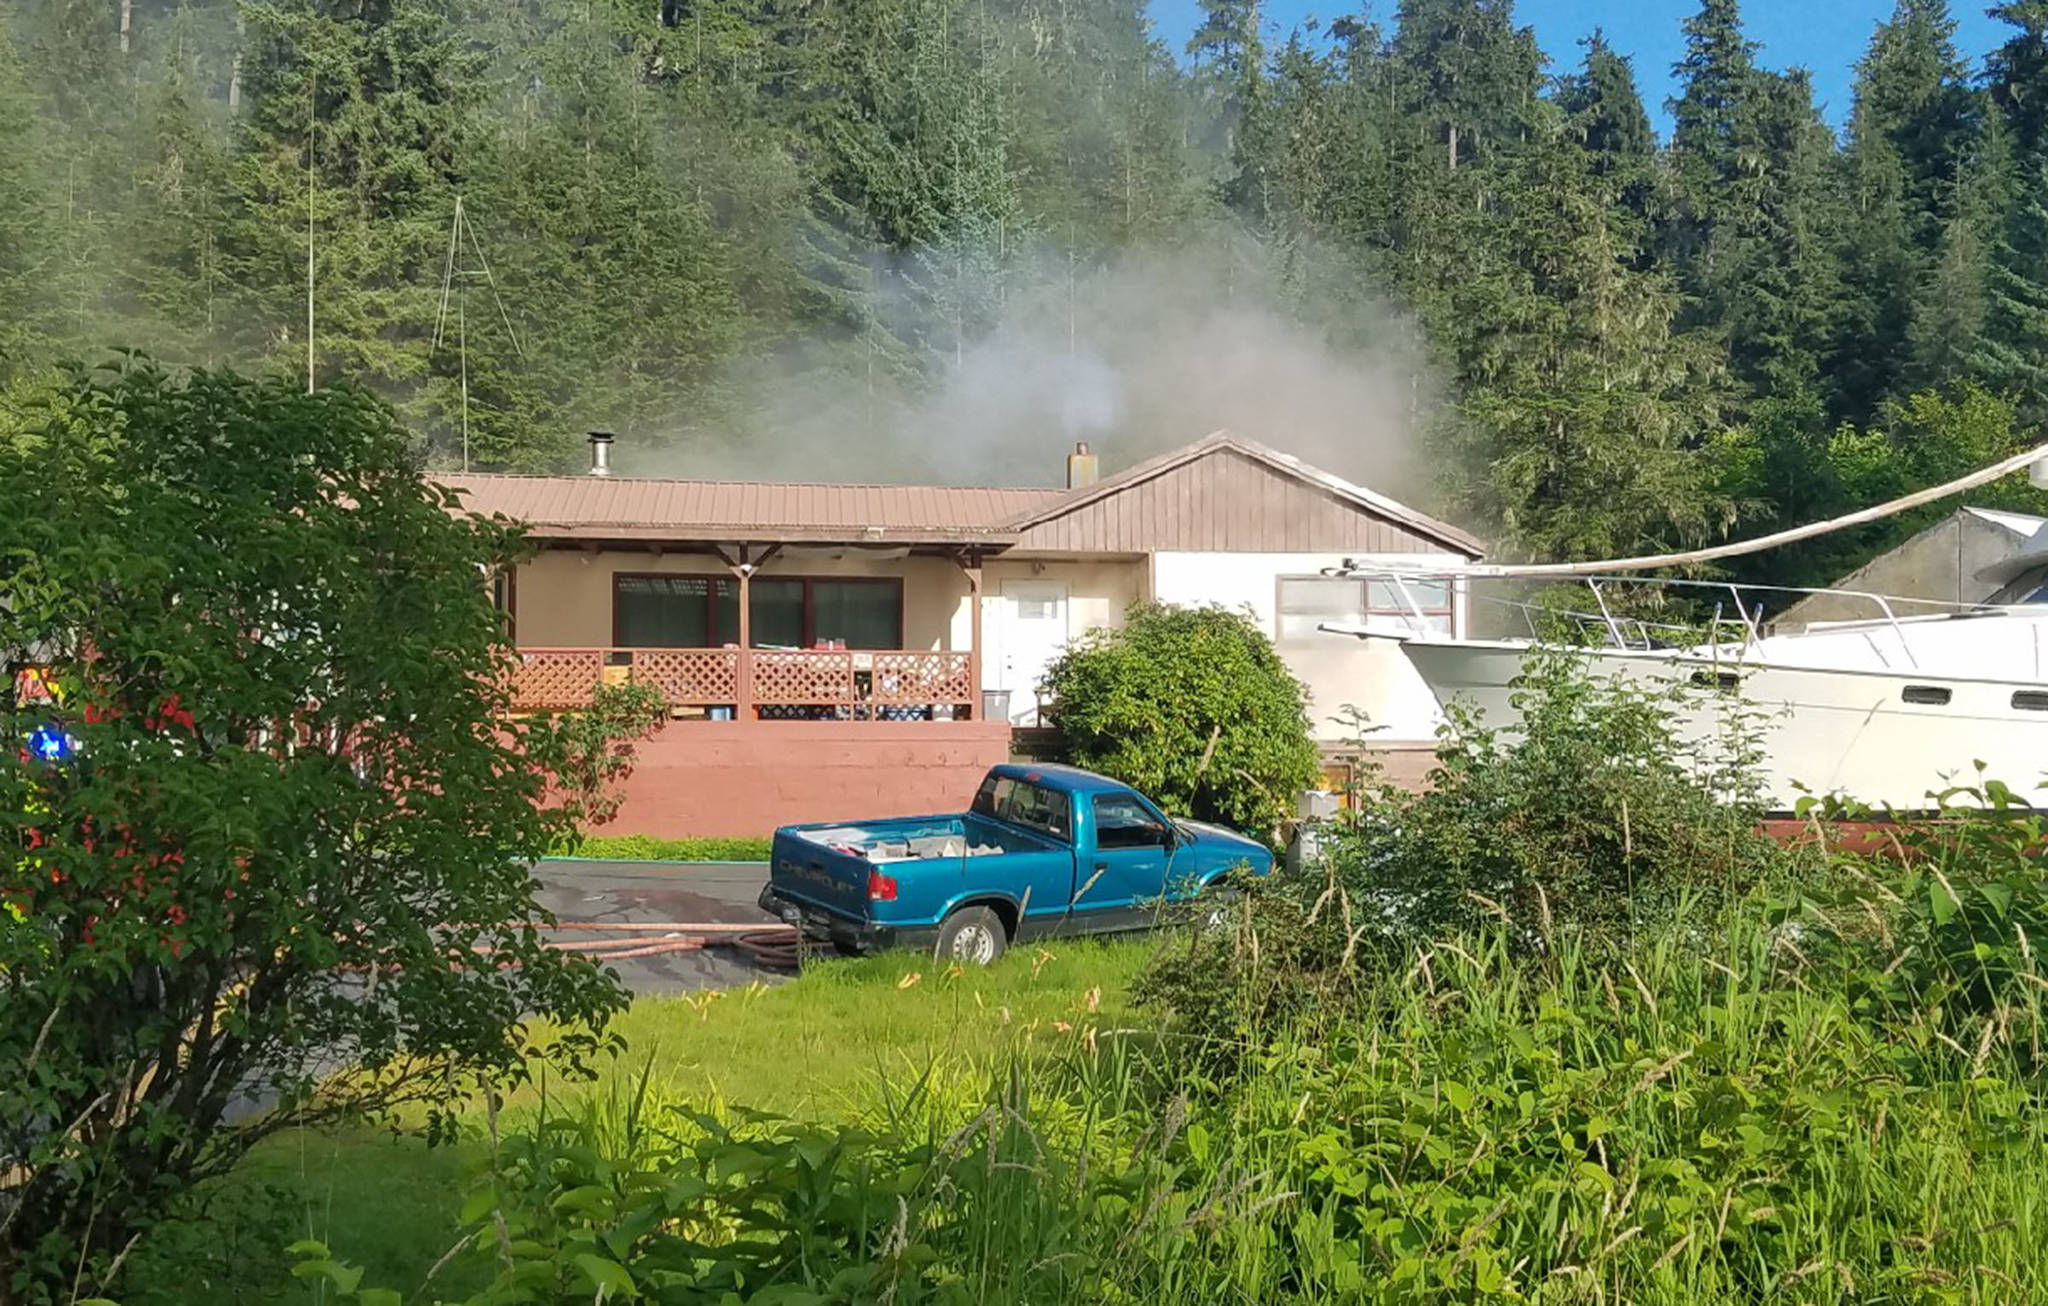 Smoke rises from a home on Fritz Cove Road on Saturday, Aug. 11, 2018. (Capital City Fire/Rescue | Courtesy Photo)